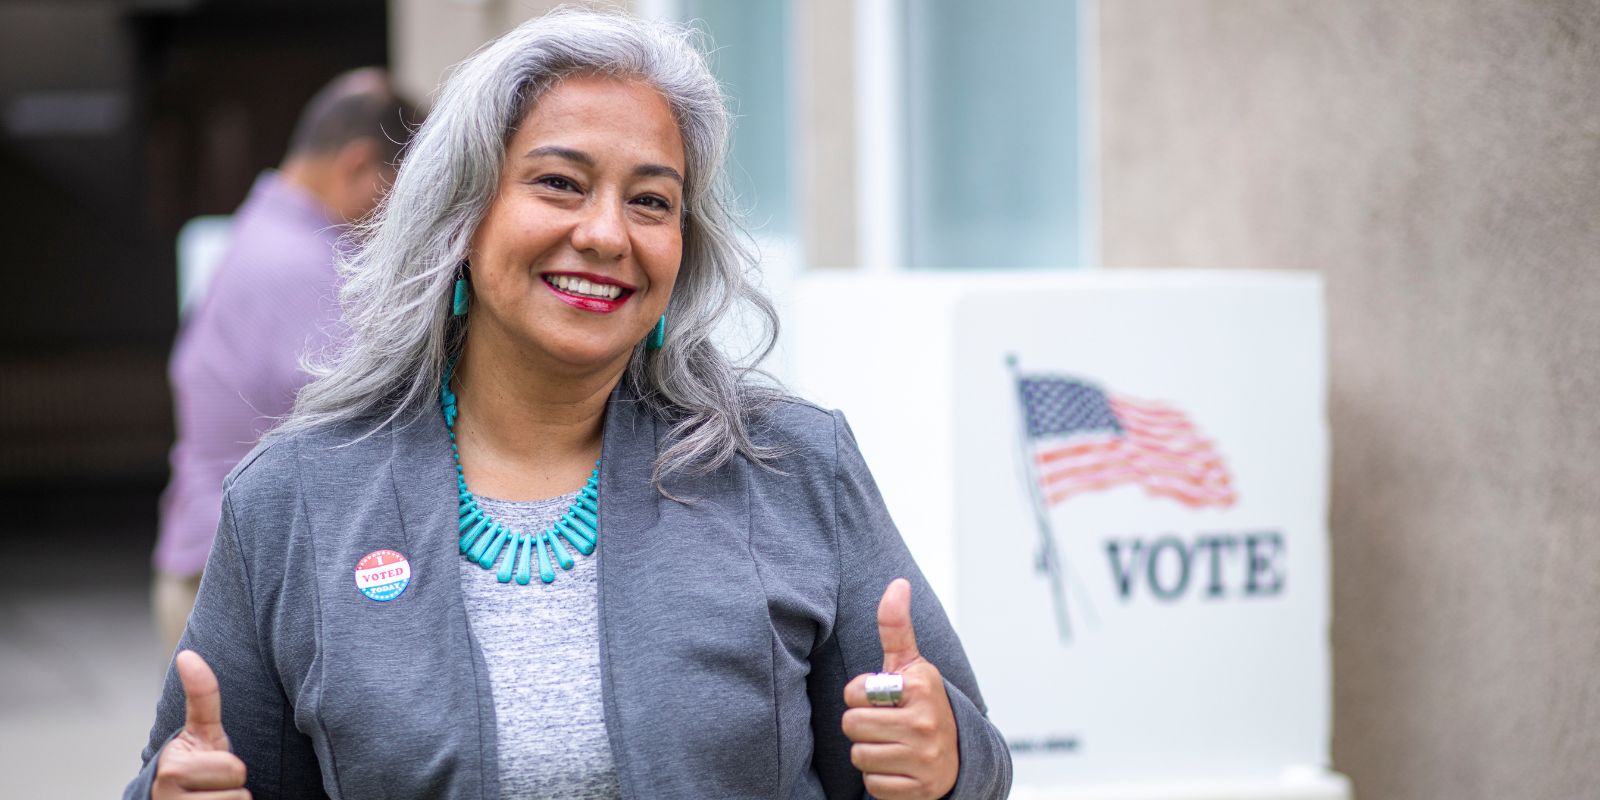 a person wearing a grey jacket smiling and giving a thumbs up. the person is wearing an "i voted" sticker.